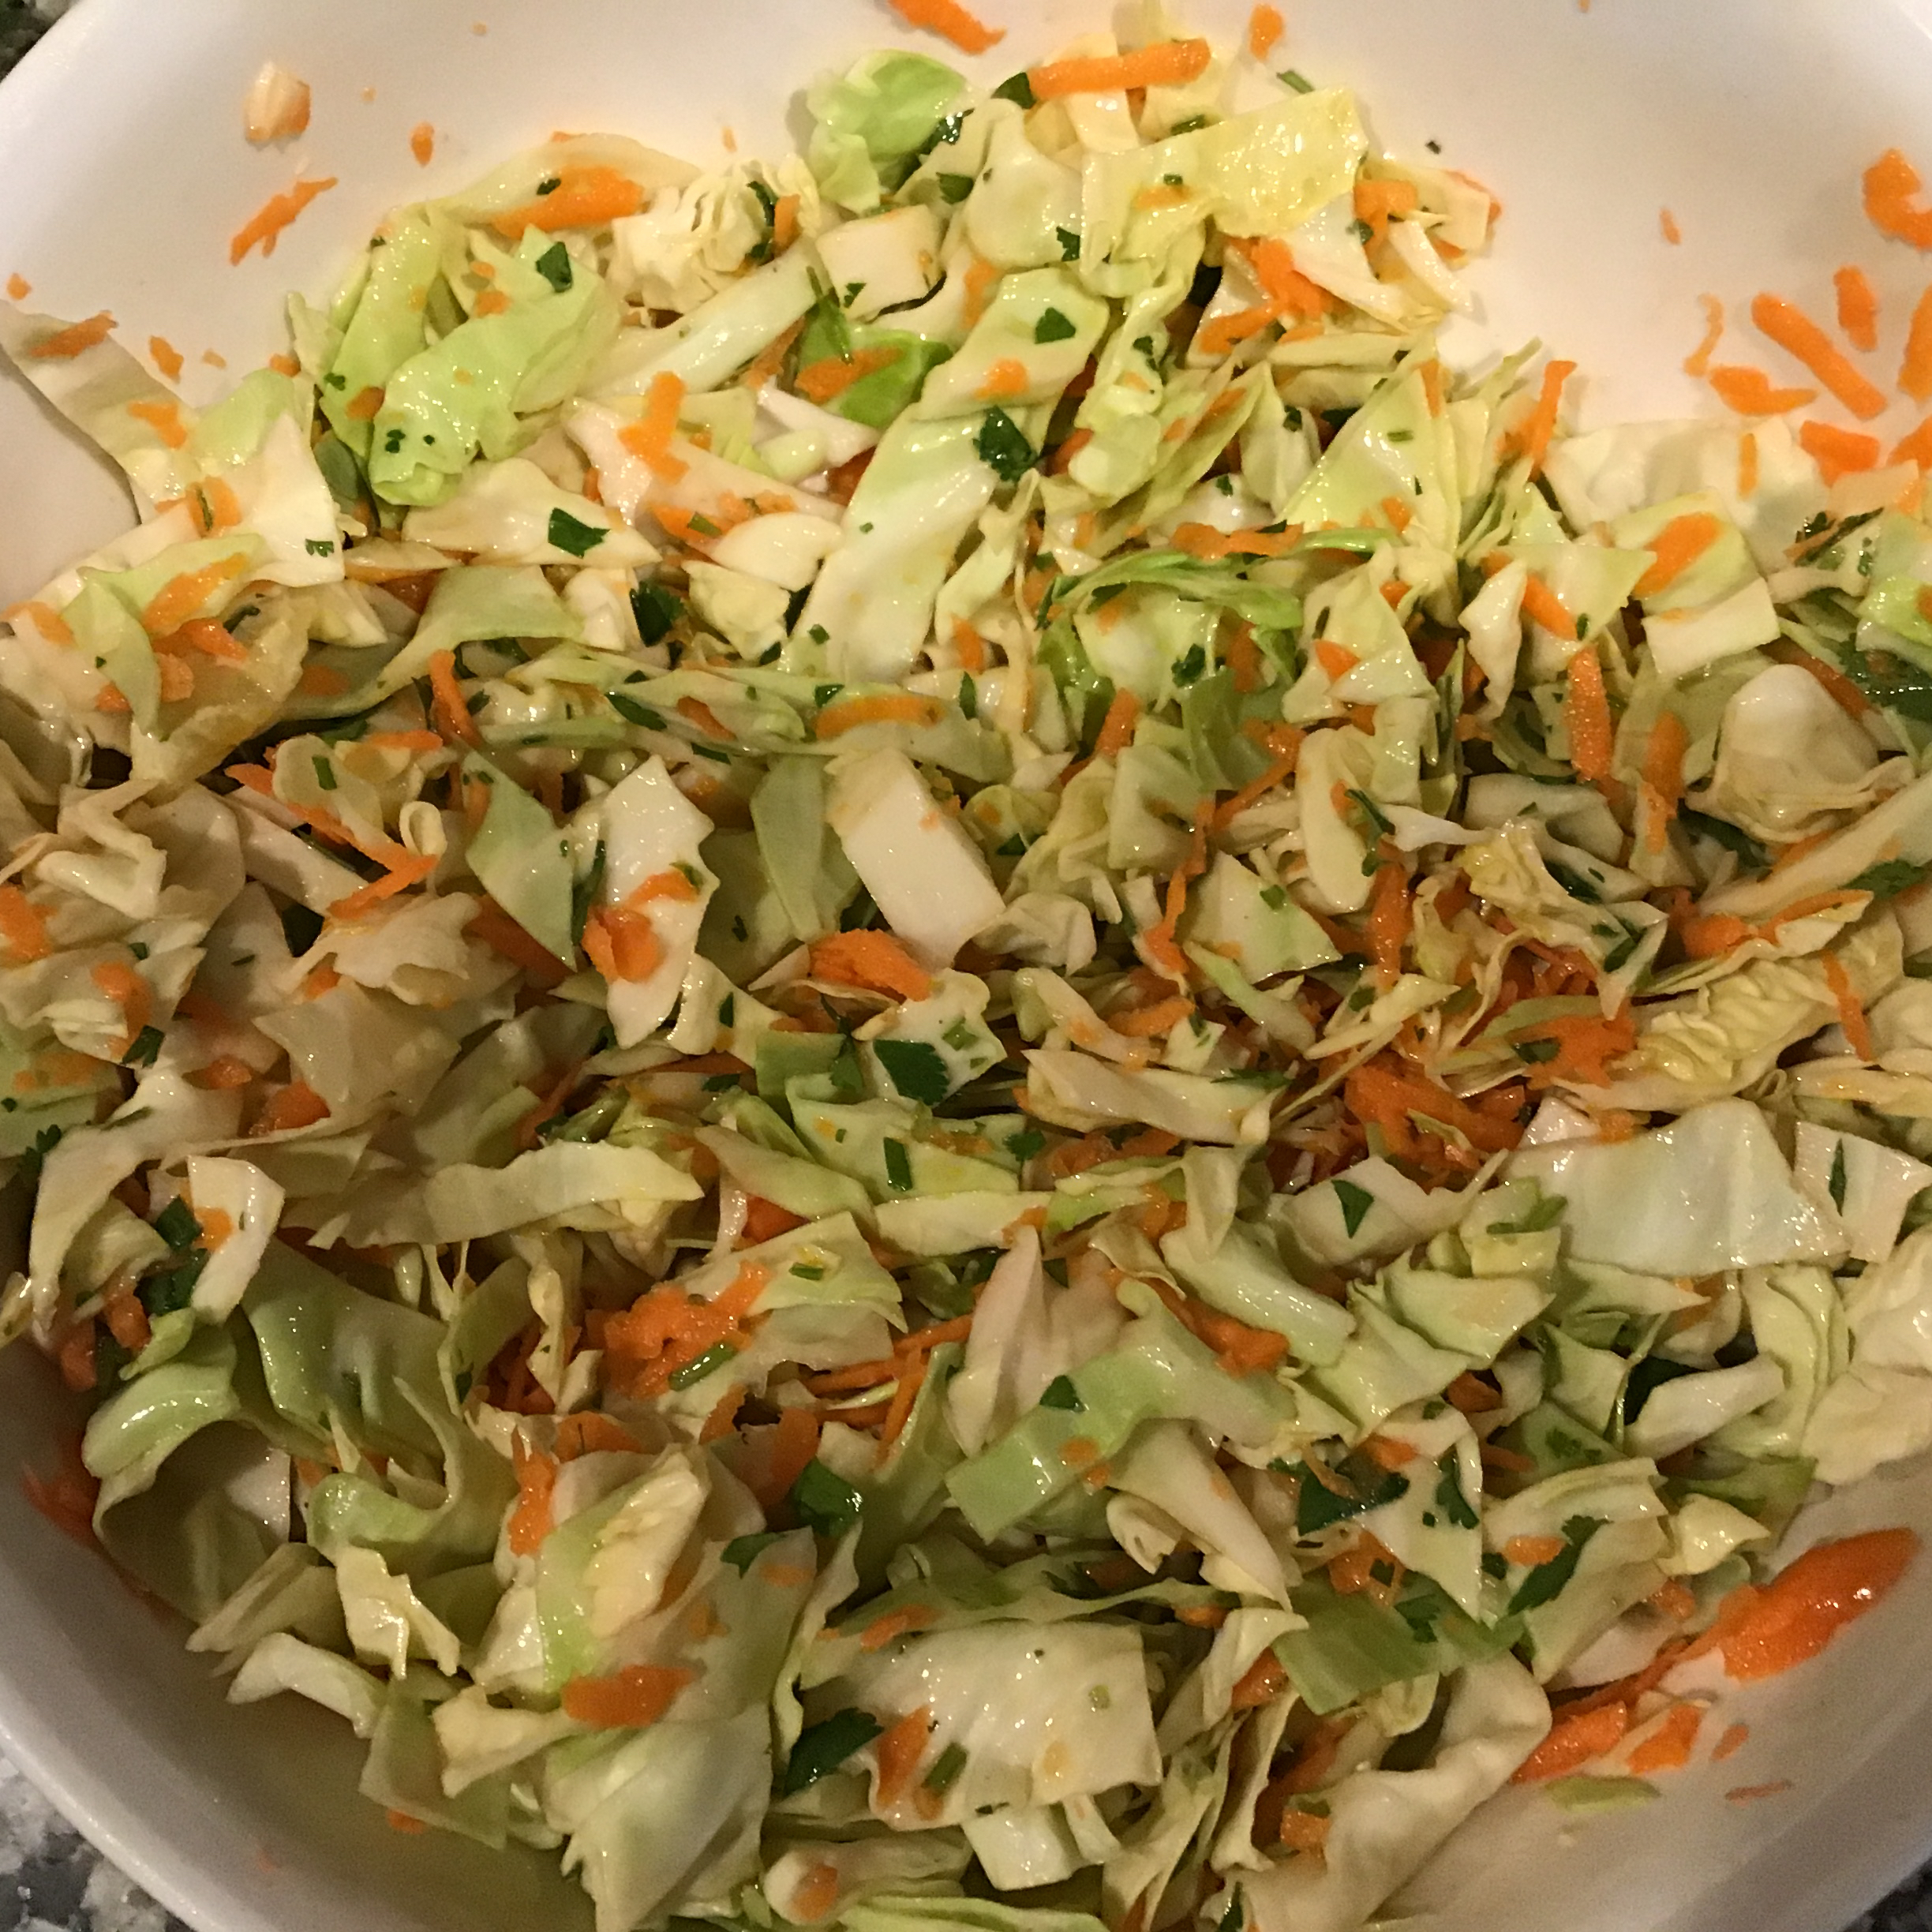 Crunchy and Spicy Mexican Slaw